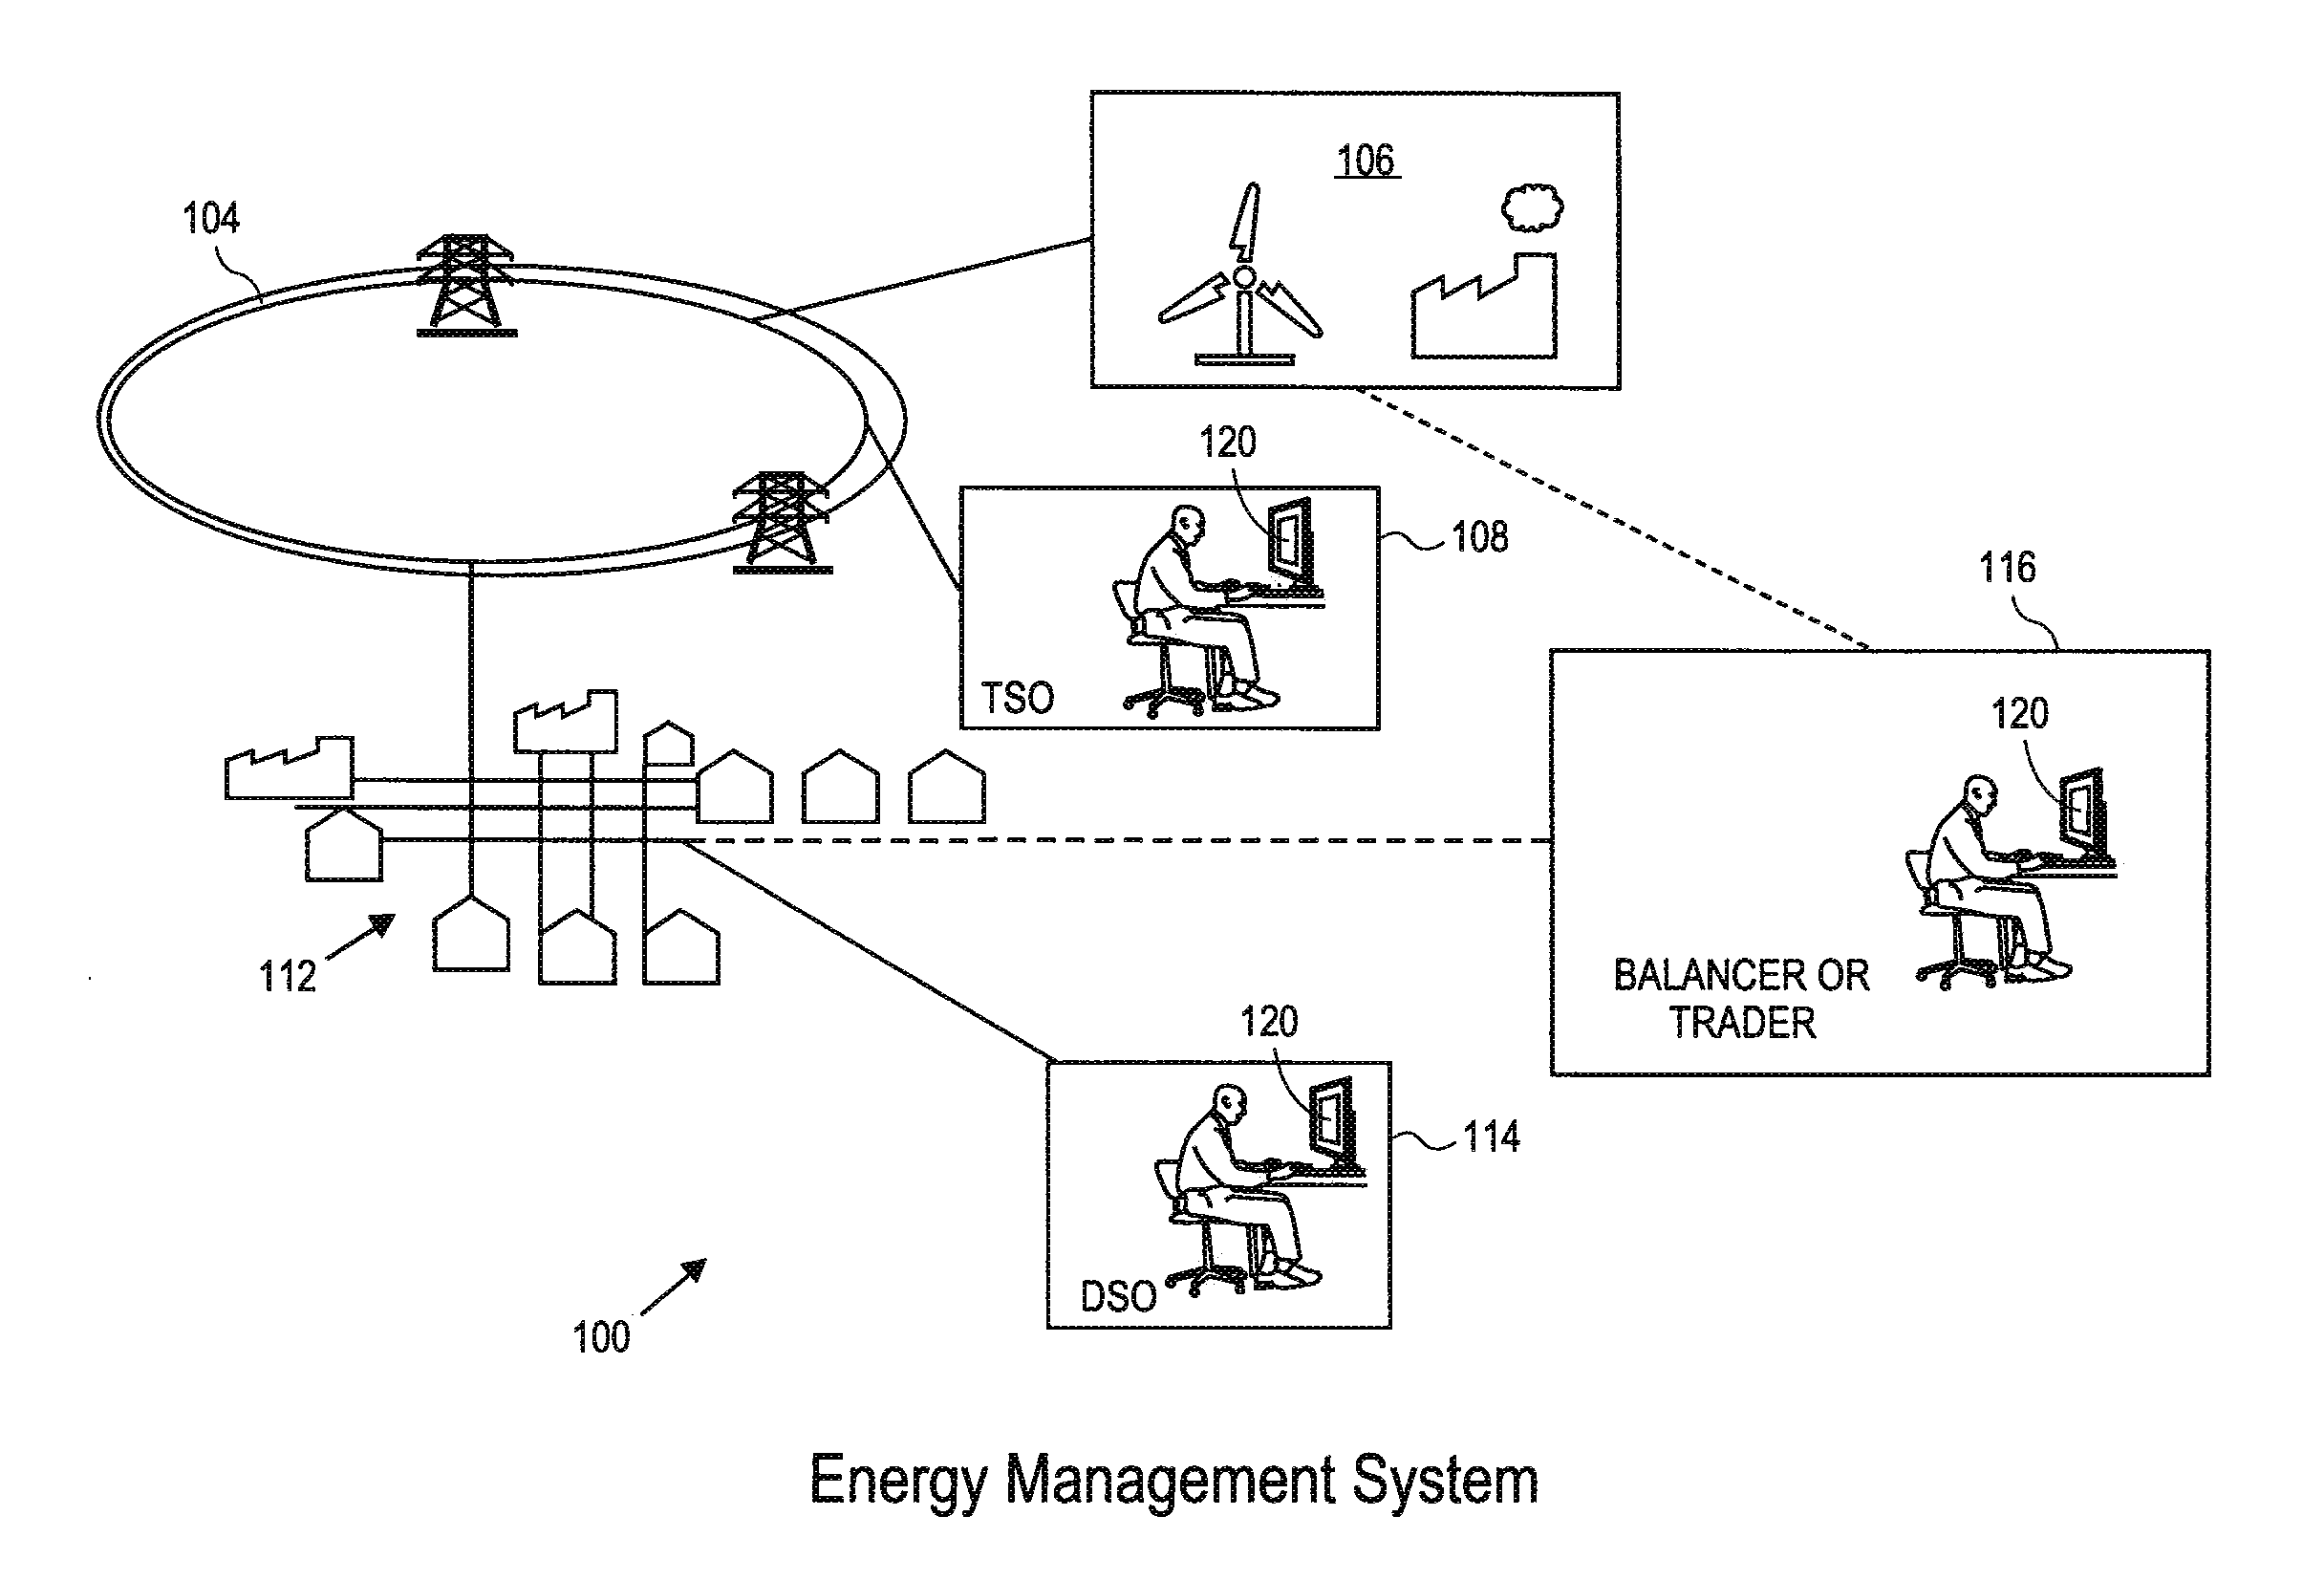 Automated demand response energy management system